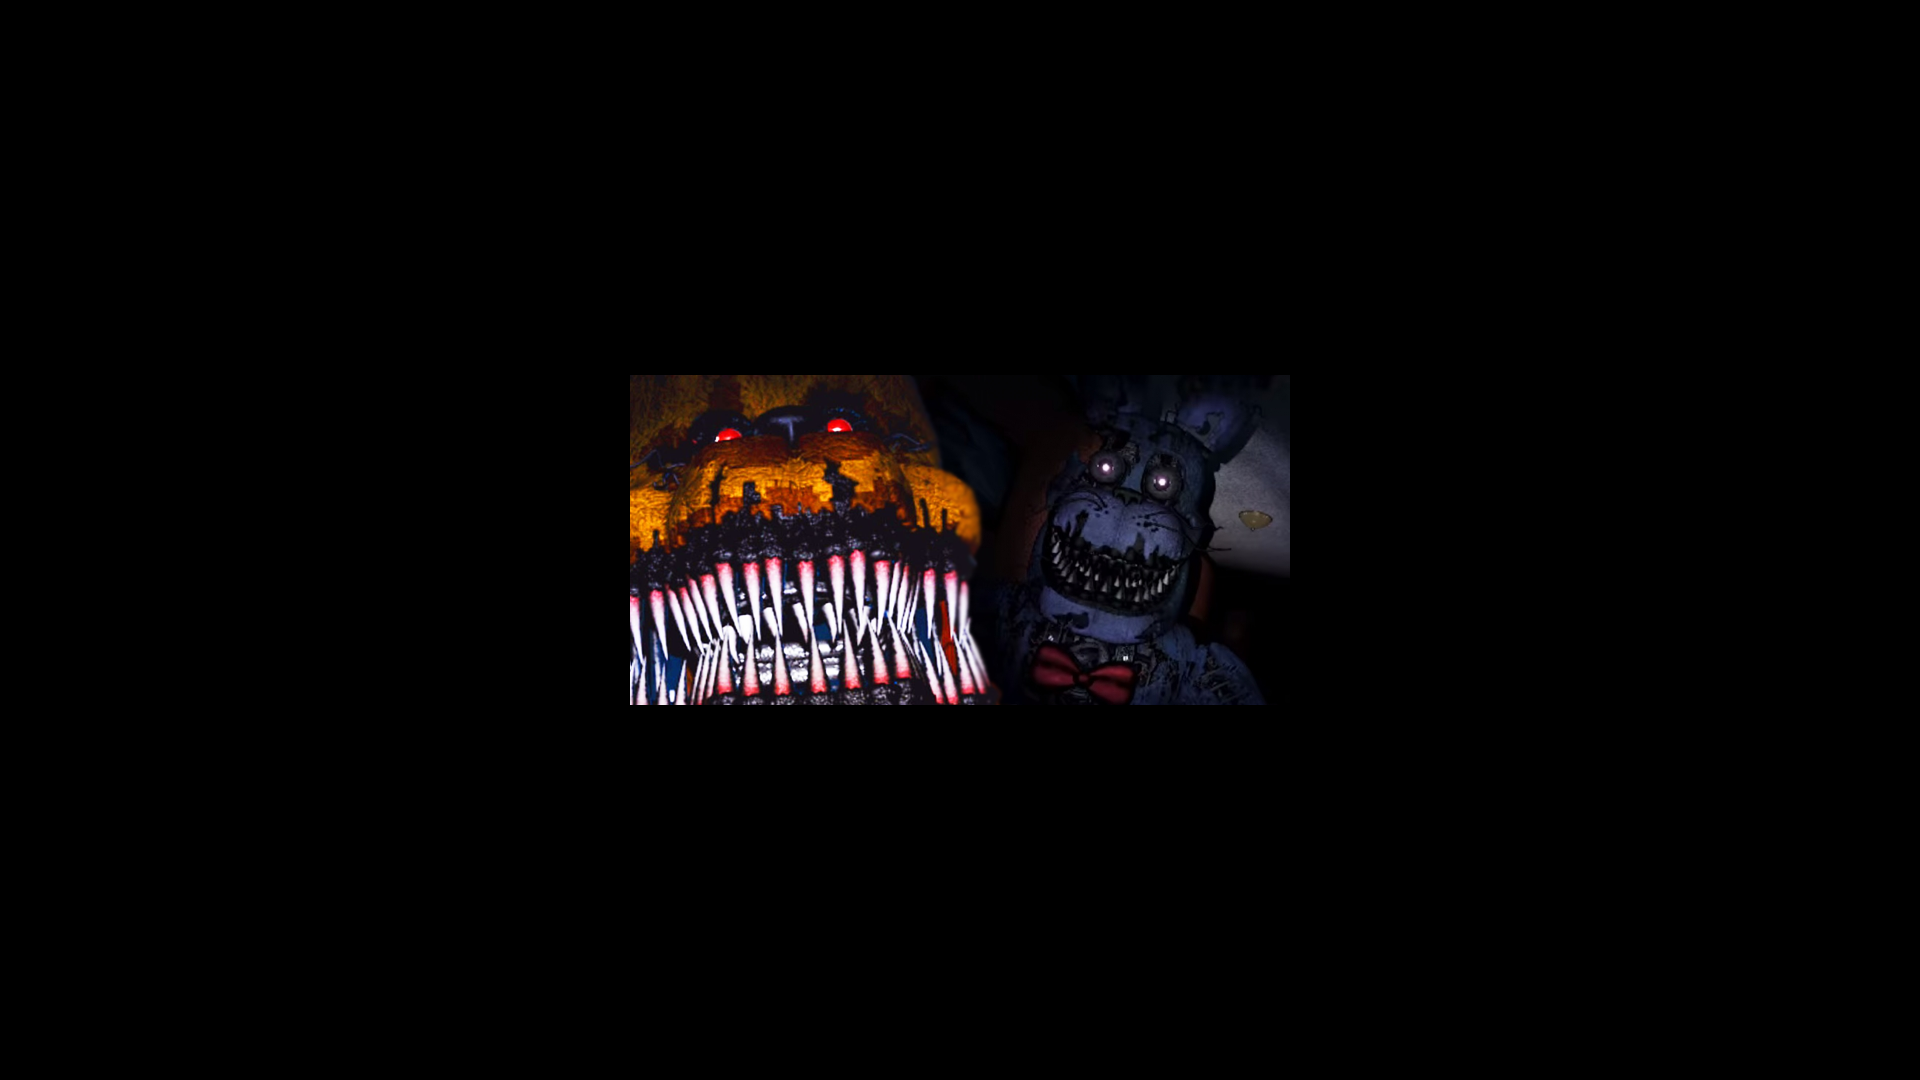 FNaF 4 Mini Game Ambiance Extended 